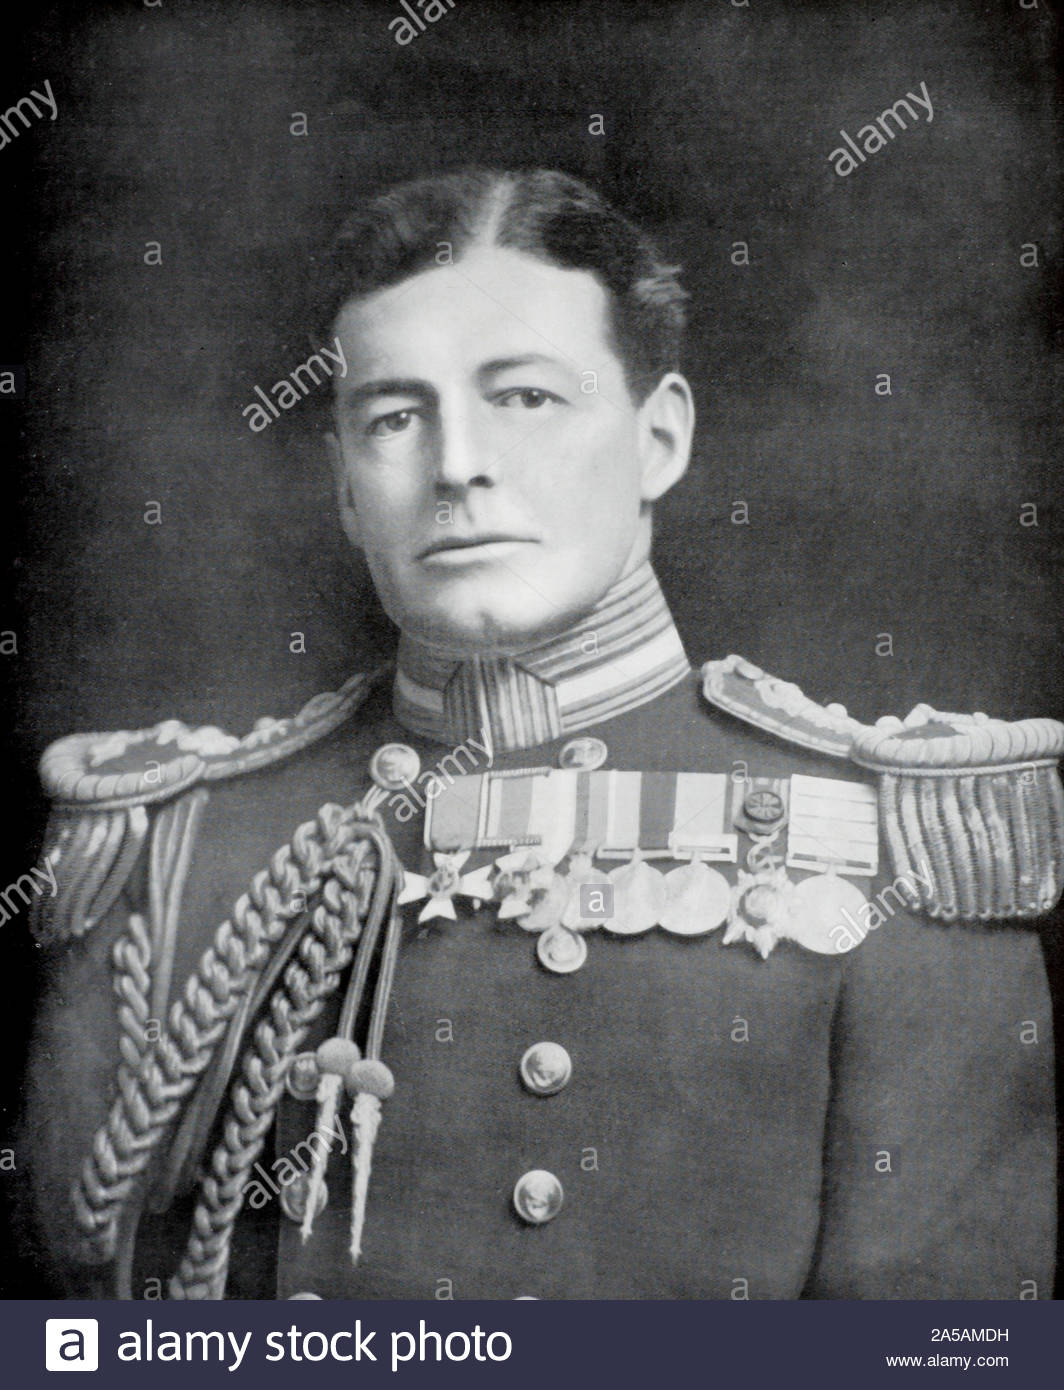 Sir David Beatty, Admiral of the Fleet, Earl Beatty 1871 - 1936, was a British Naval Commander, photograph from early 1900s Stock Photo